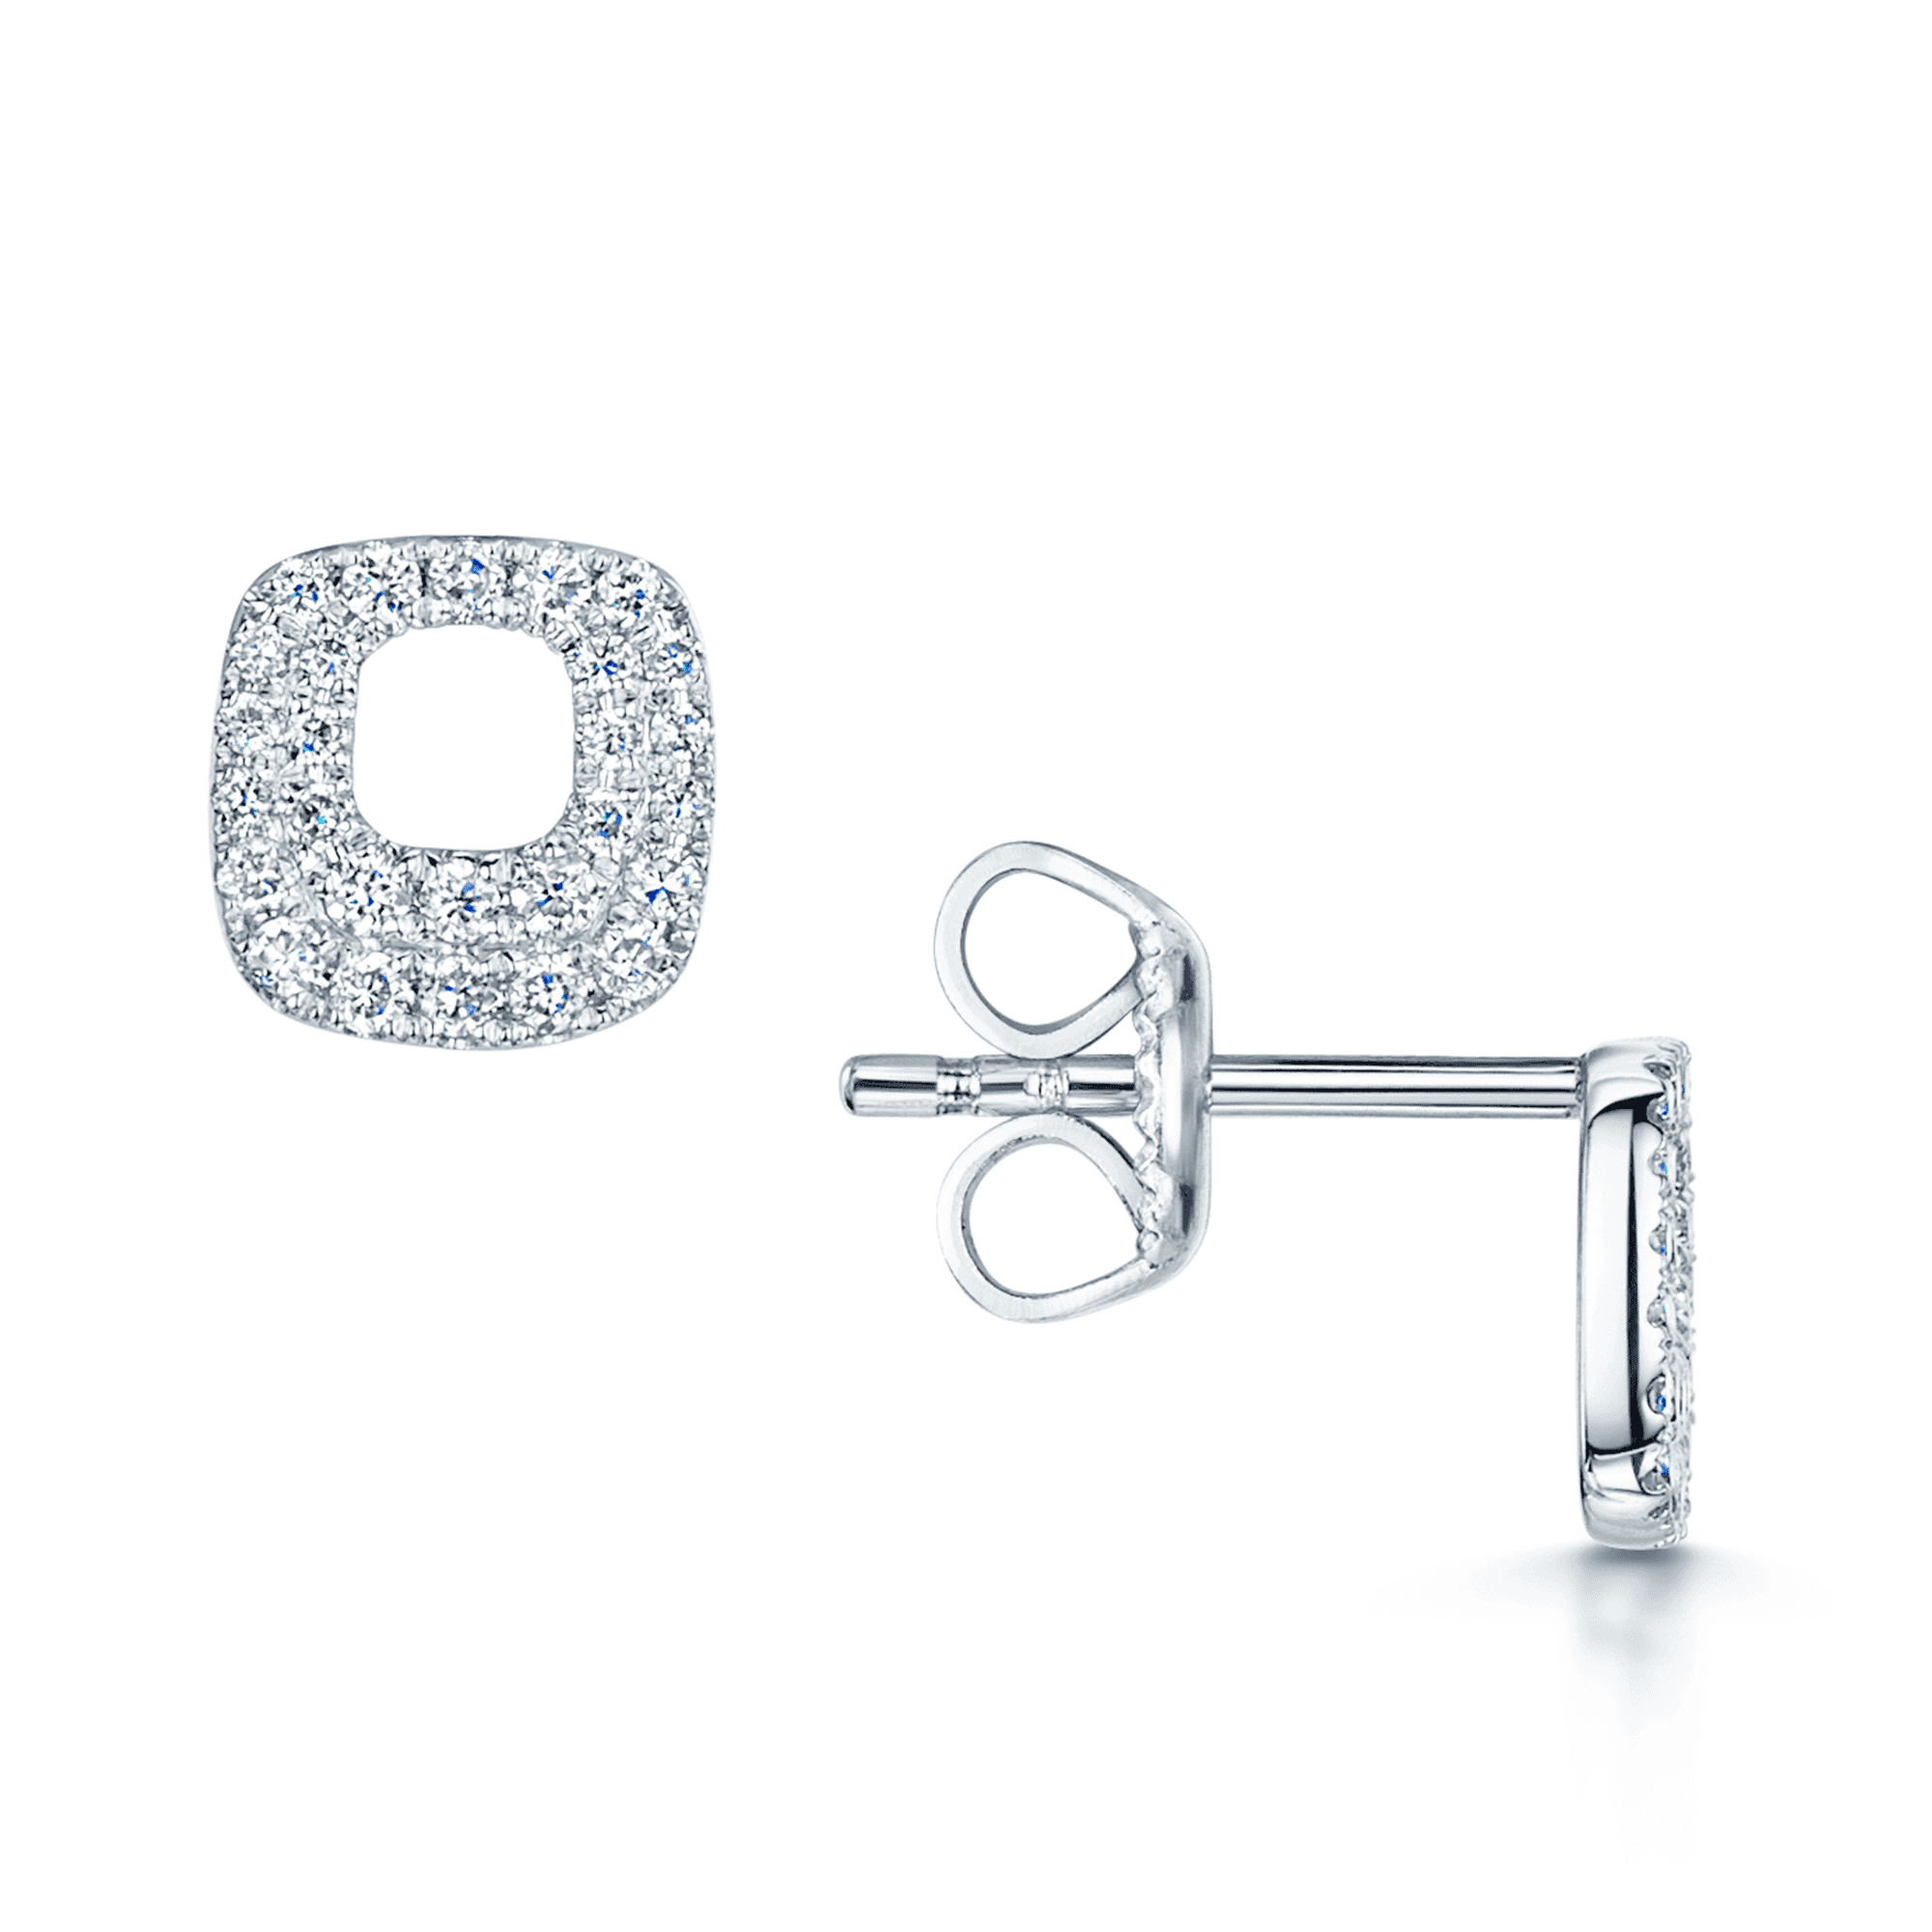 18ct White Gold Diamond Set Rounded Square Stud Earrings